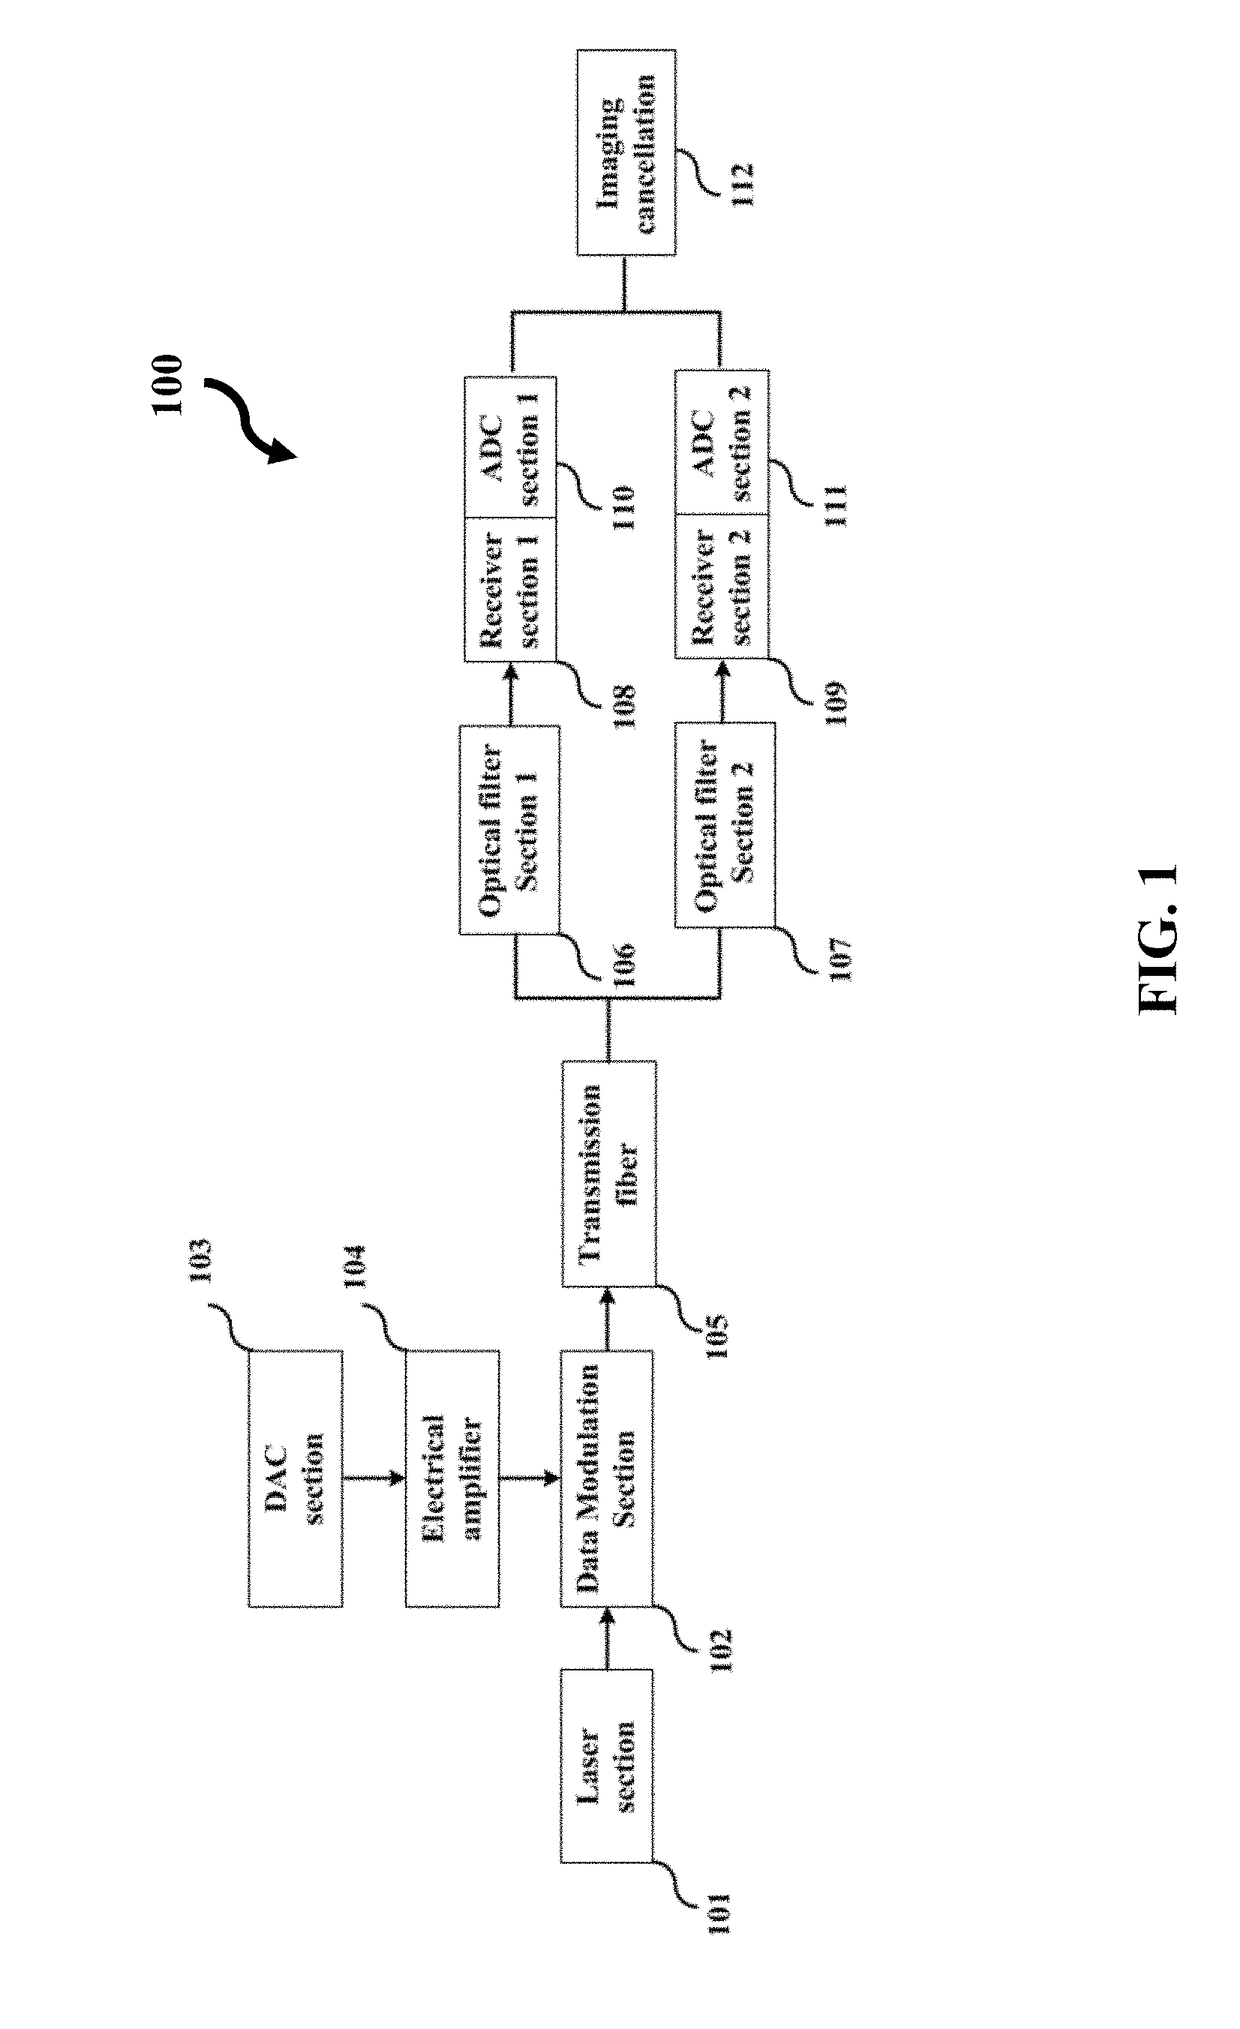 Imaging cancellation in high-speed intensity modulation and direct detection system with dual single sideband modulation